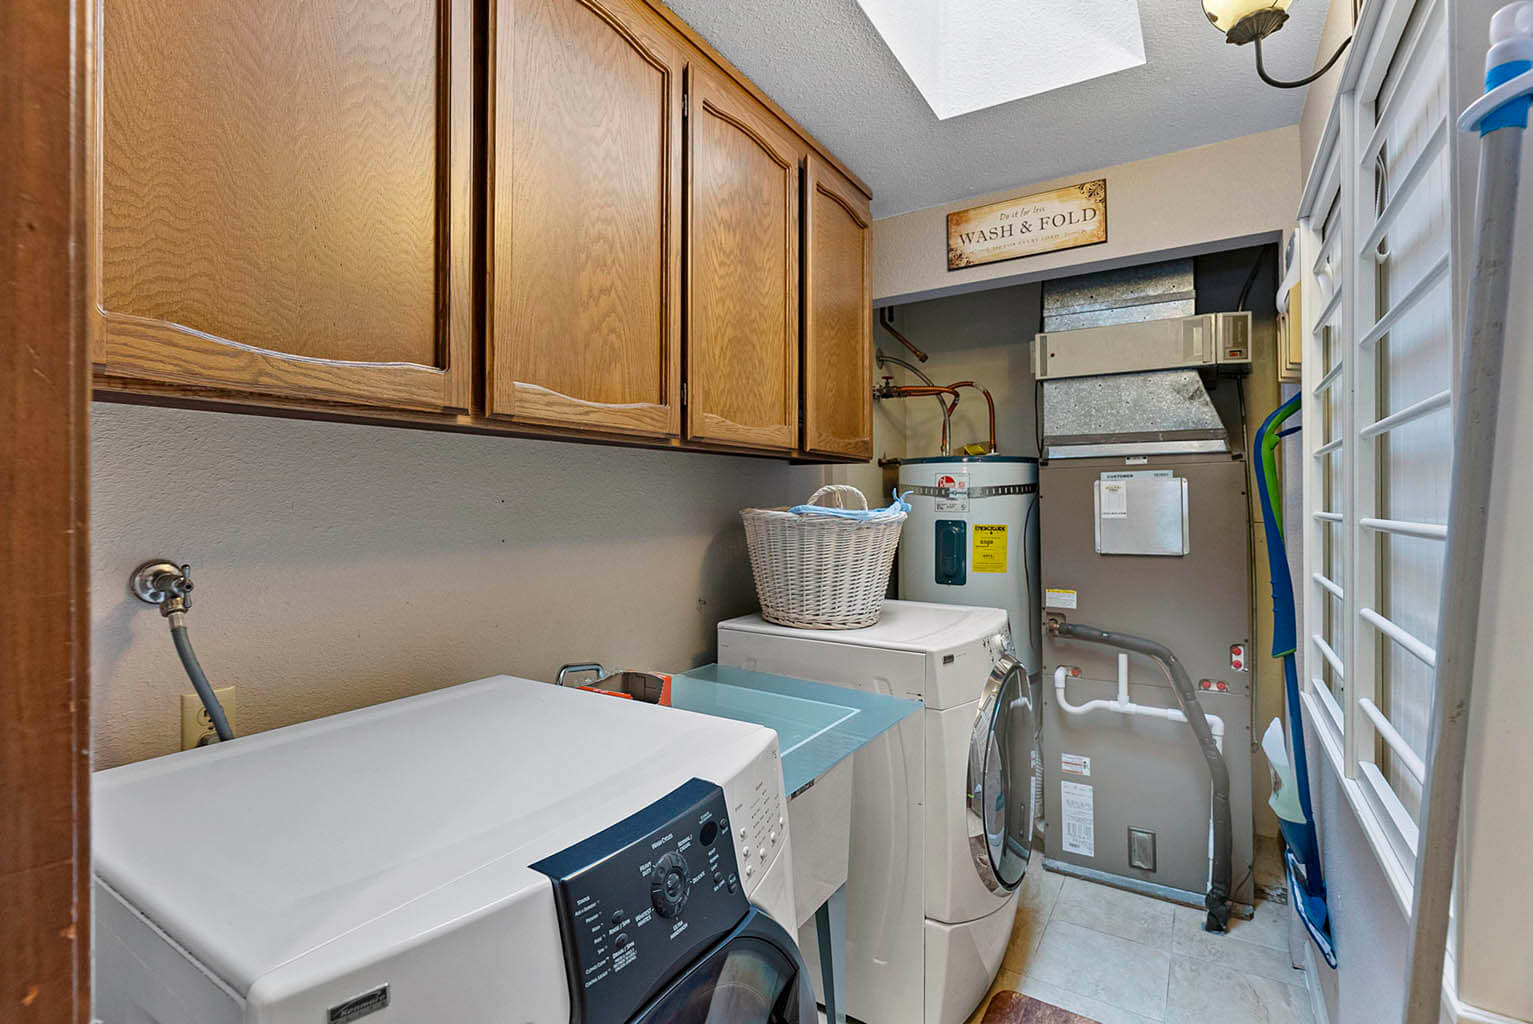 Laundry room with utility sink and cabinet storage